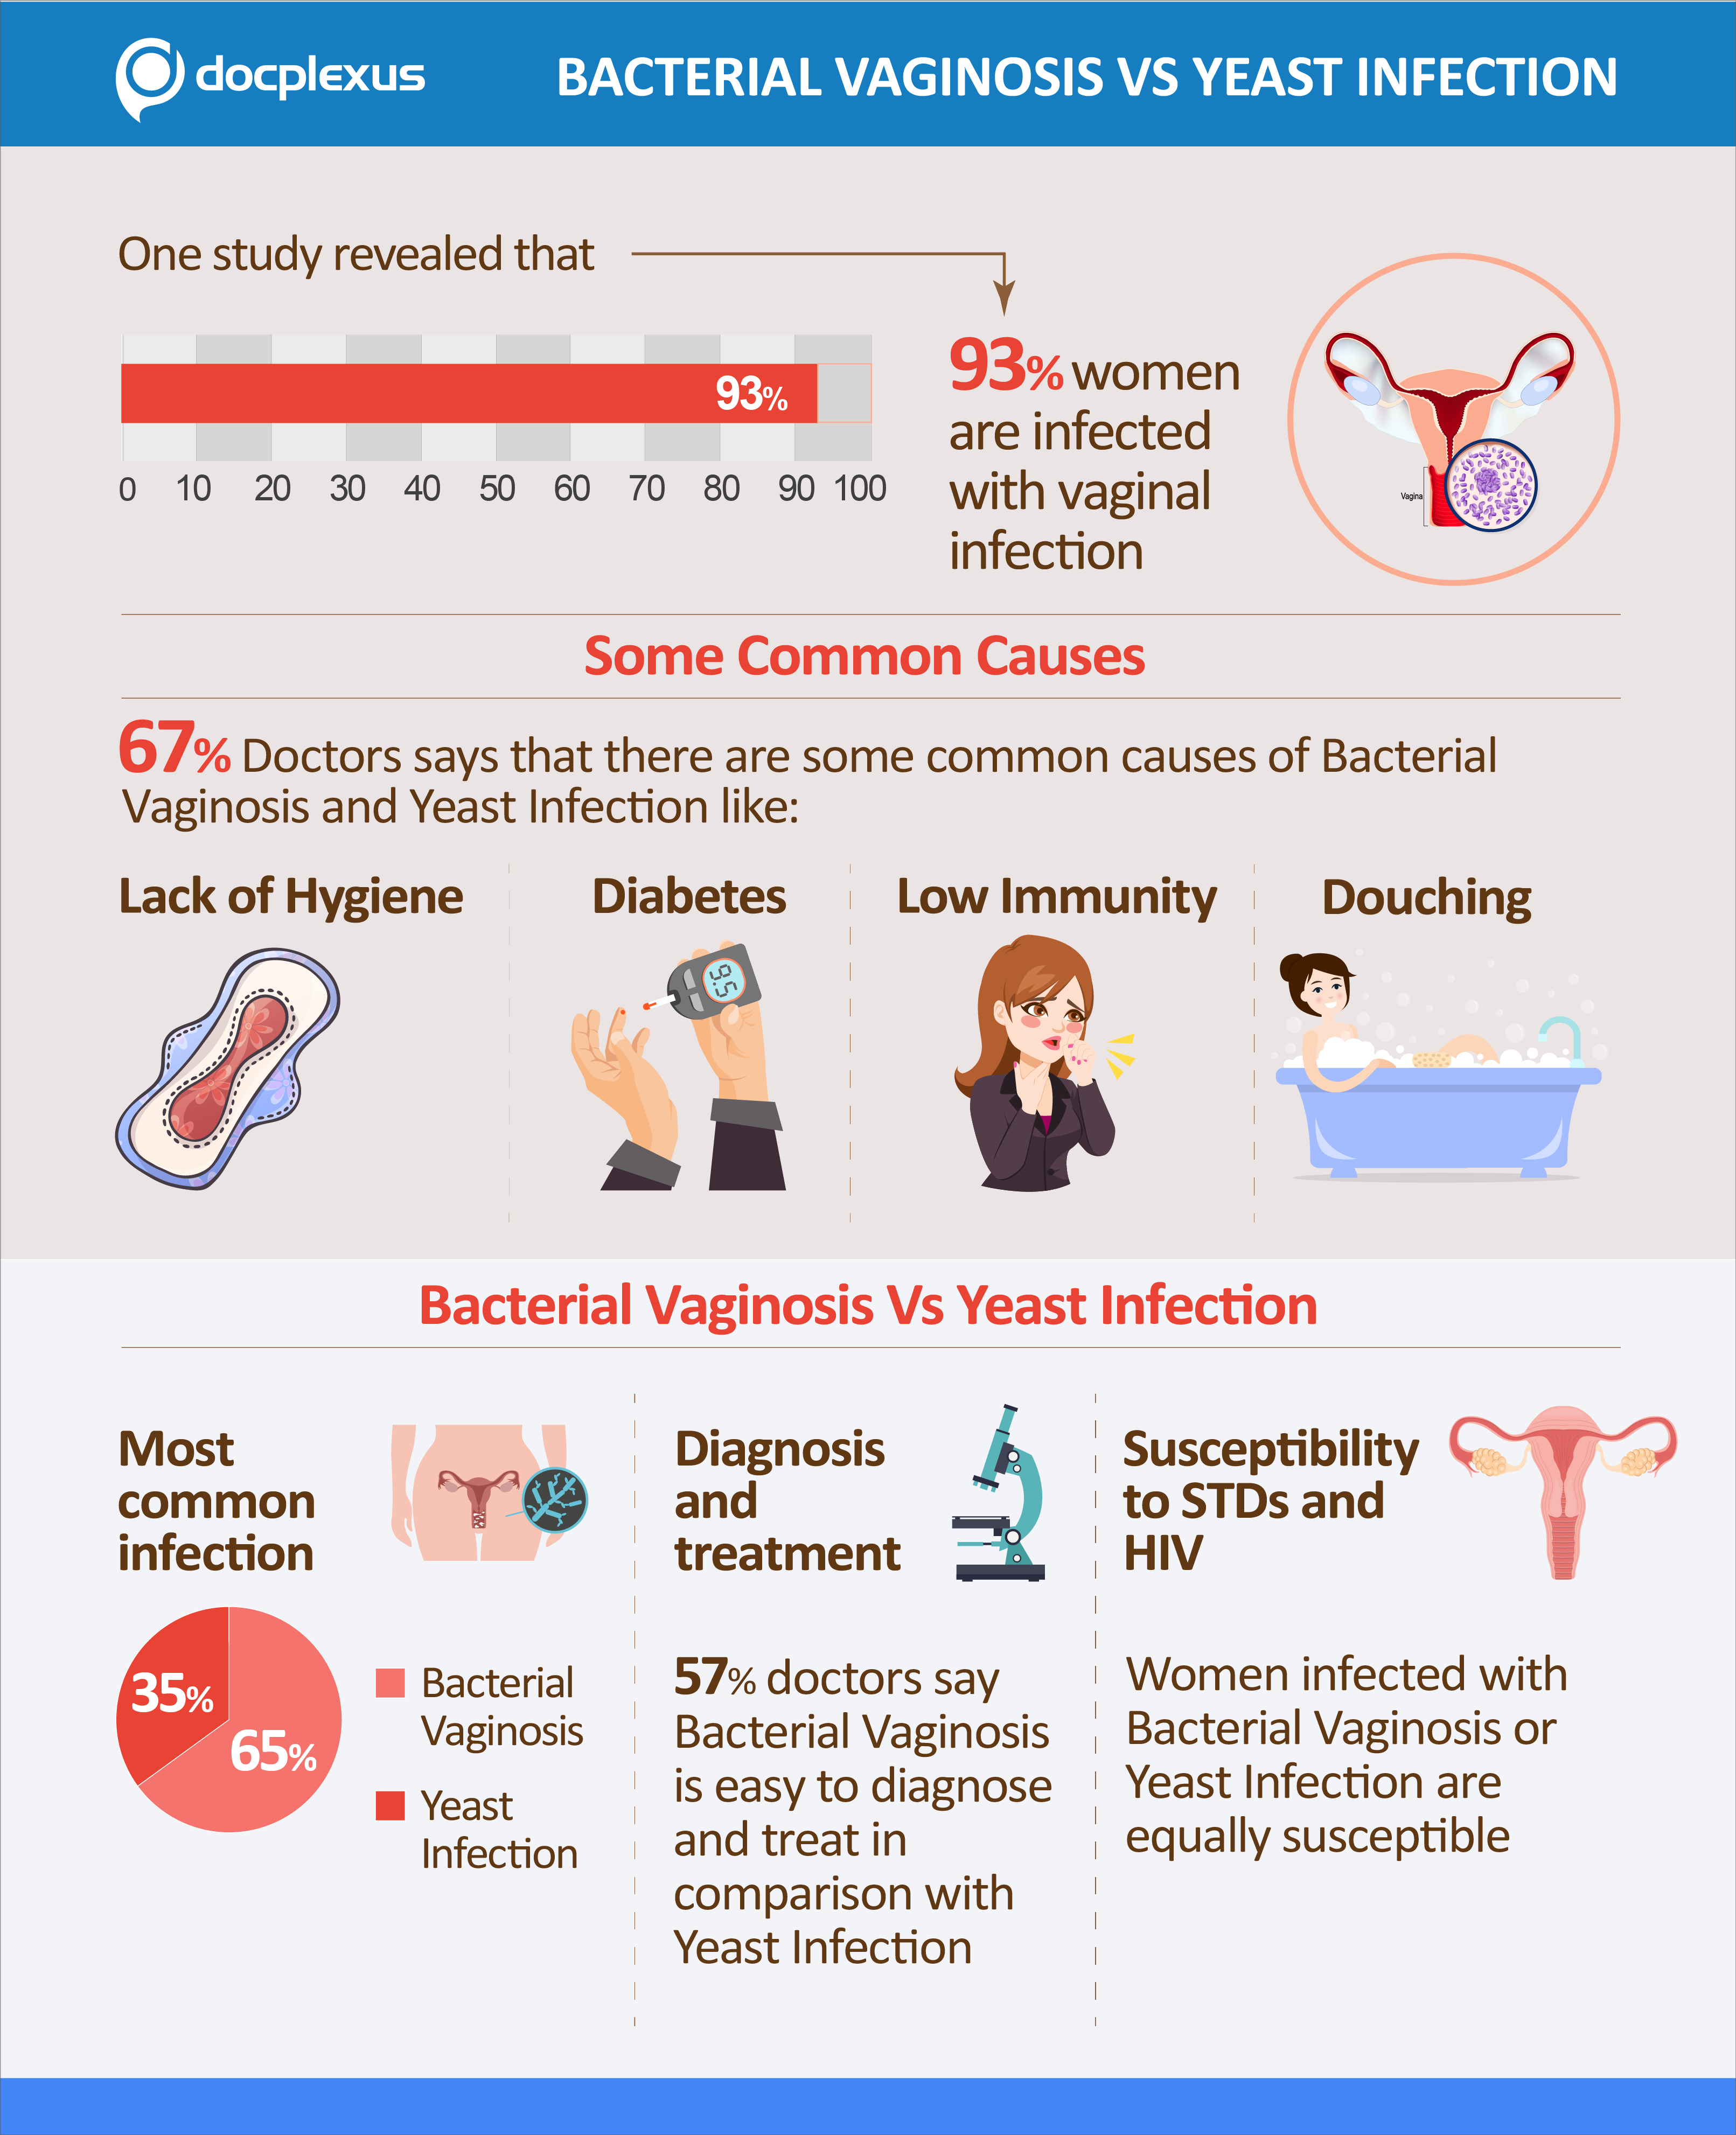 Whats the difference between a yeast infection and bacterial vaginosis Survey Based Analysis Of Bacterial Vaginosis Vs Yeast Infection